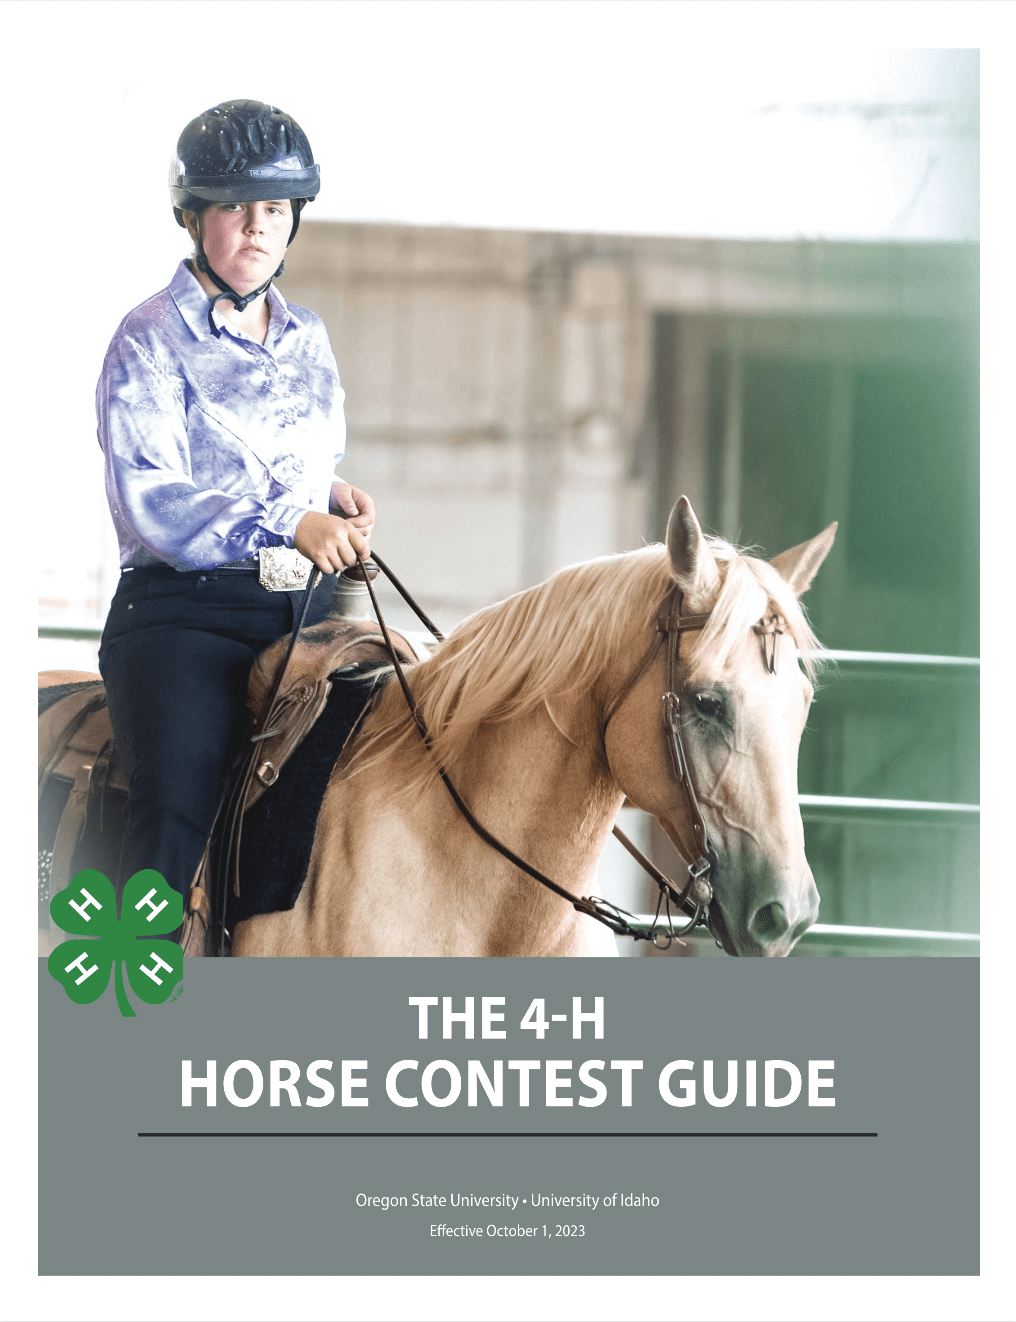 The 4-H Horse Contest Guide cover with horse rider